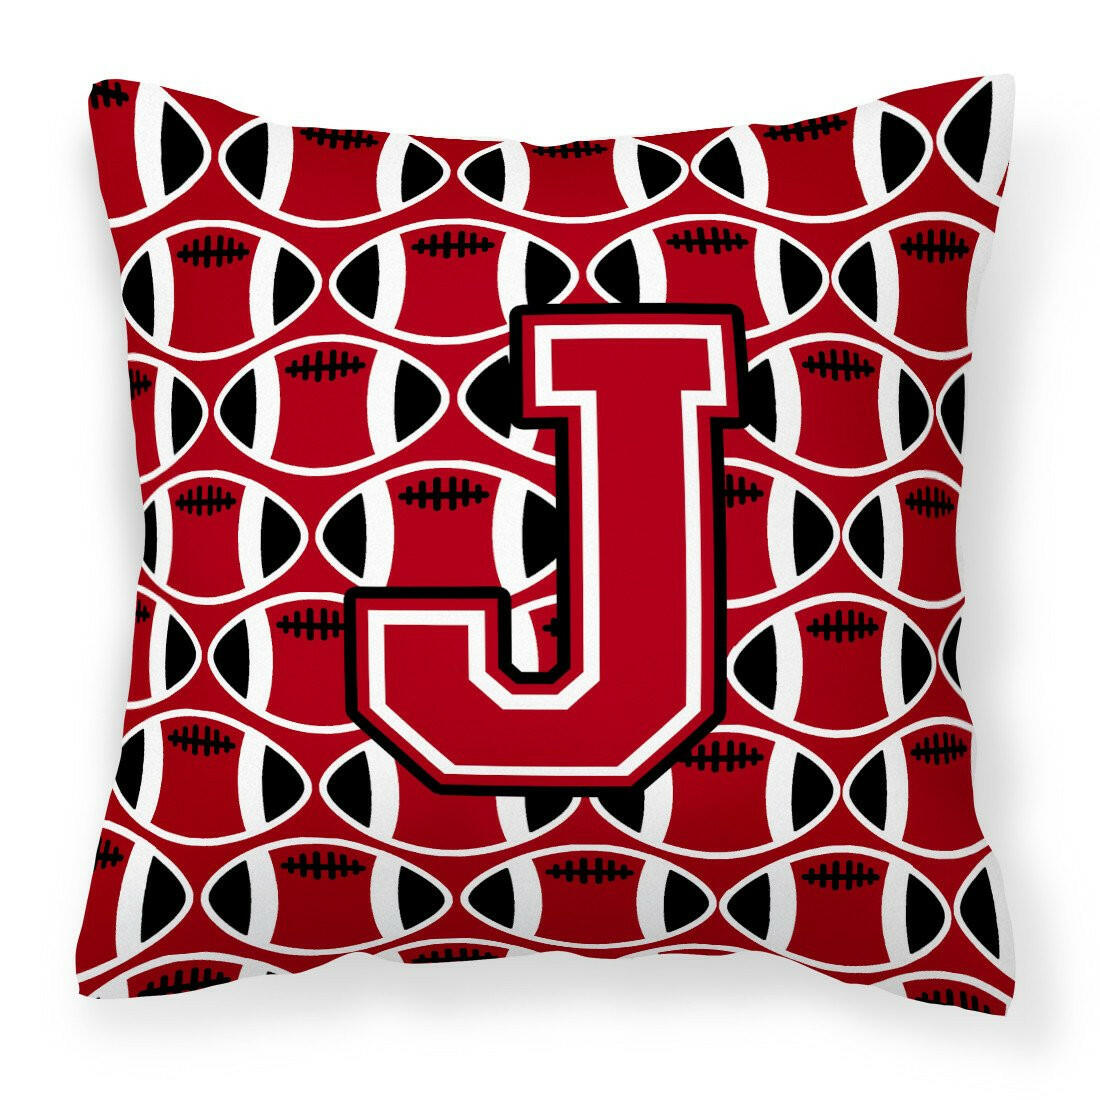 Letter J Football Red, Black and White Fabric Decorative Pillow CJ1073-JPW1414 by Caroline's Treasures